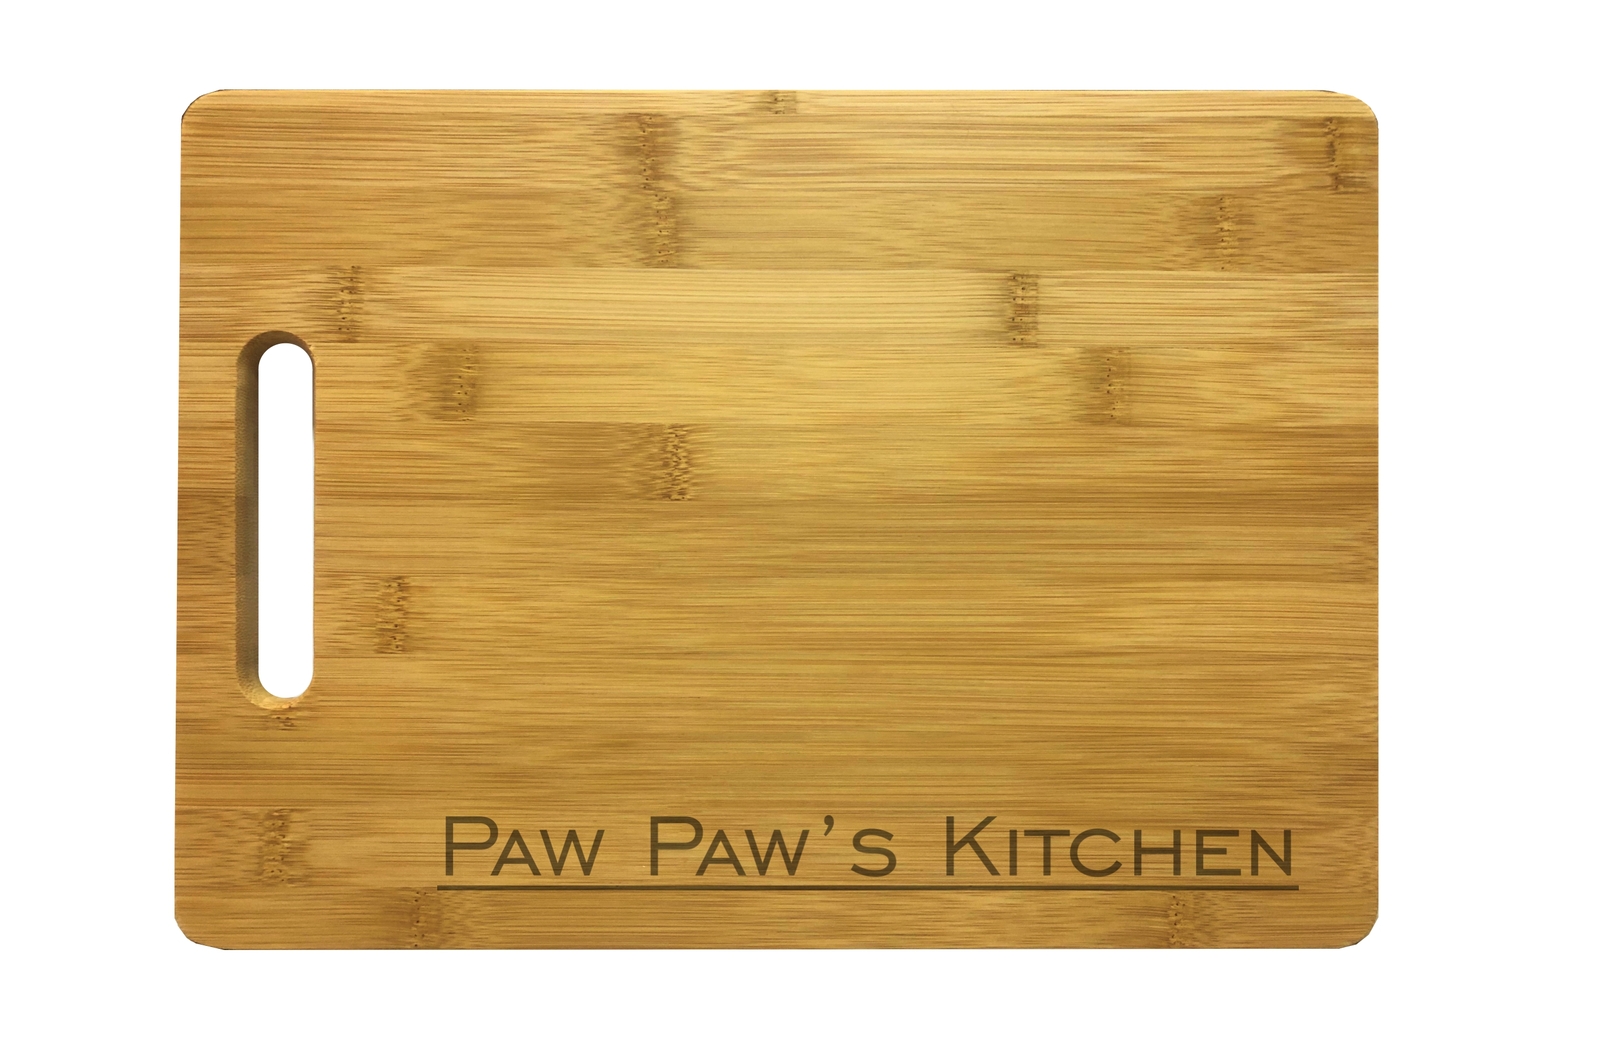 Paw Paw's Kitchen Engraved Cutting Board -Bamboo/Maple- Grandpa Gift Fathers Day - $34.99 - $54.99